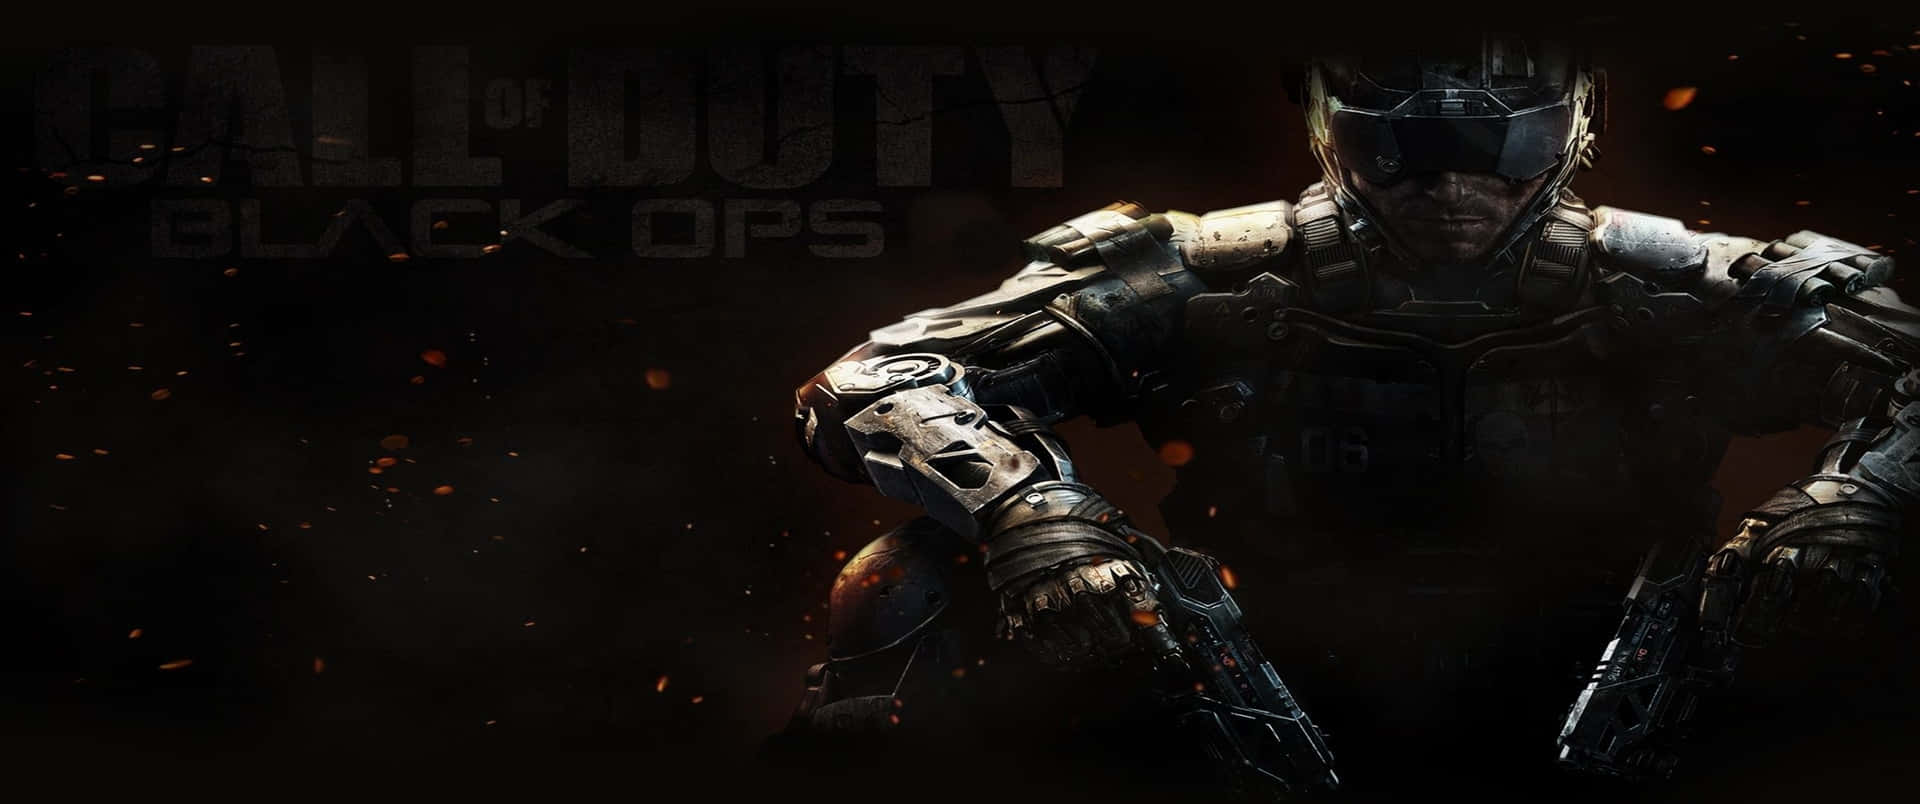 Futuristic 3440x1440p Call Of Duty Black Ops Cold War Background